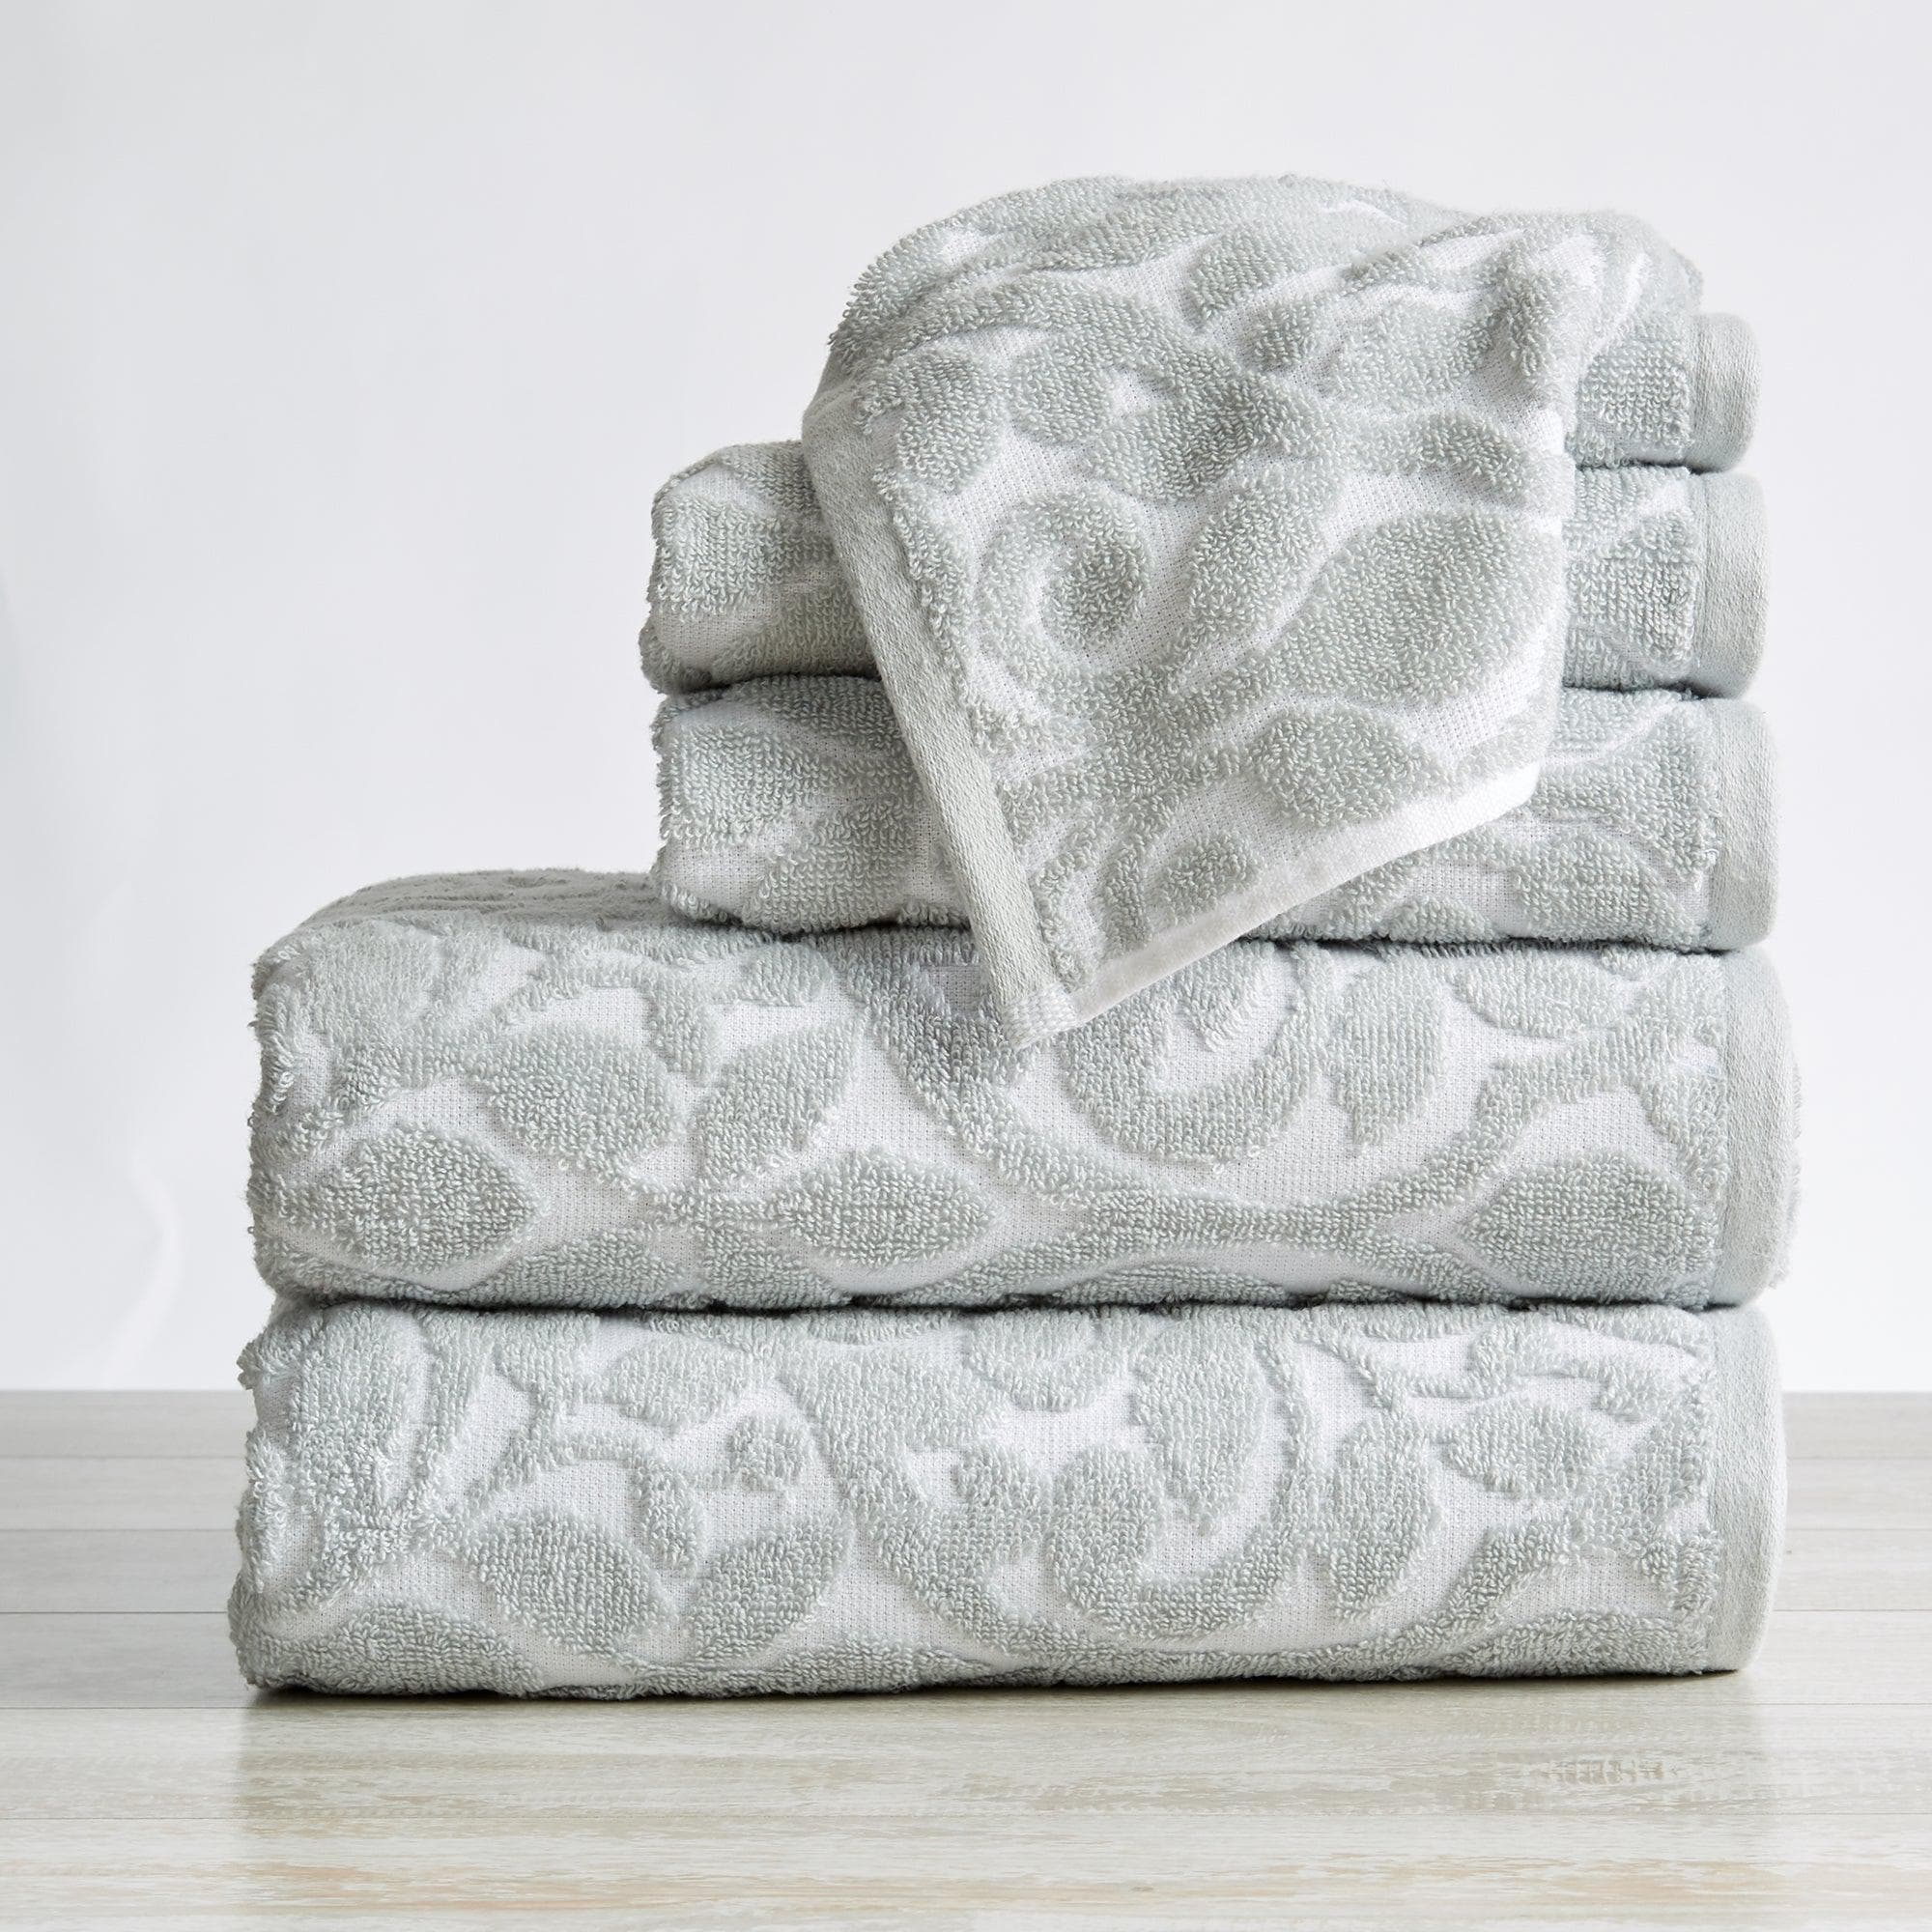 Organic Towel Sets in Space Grey, Towel Collections